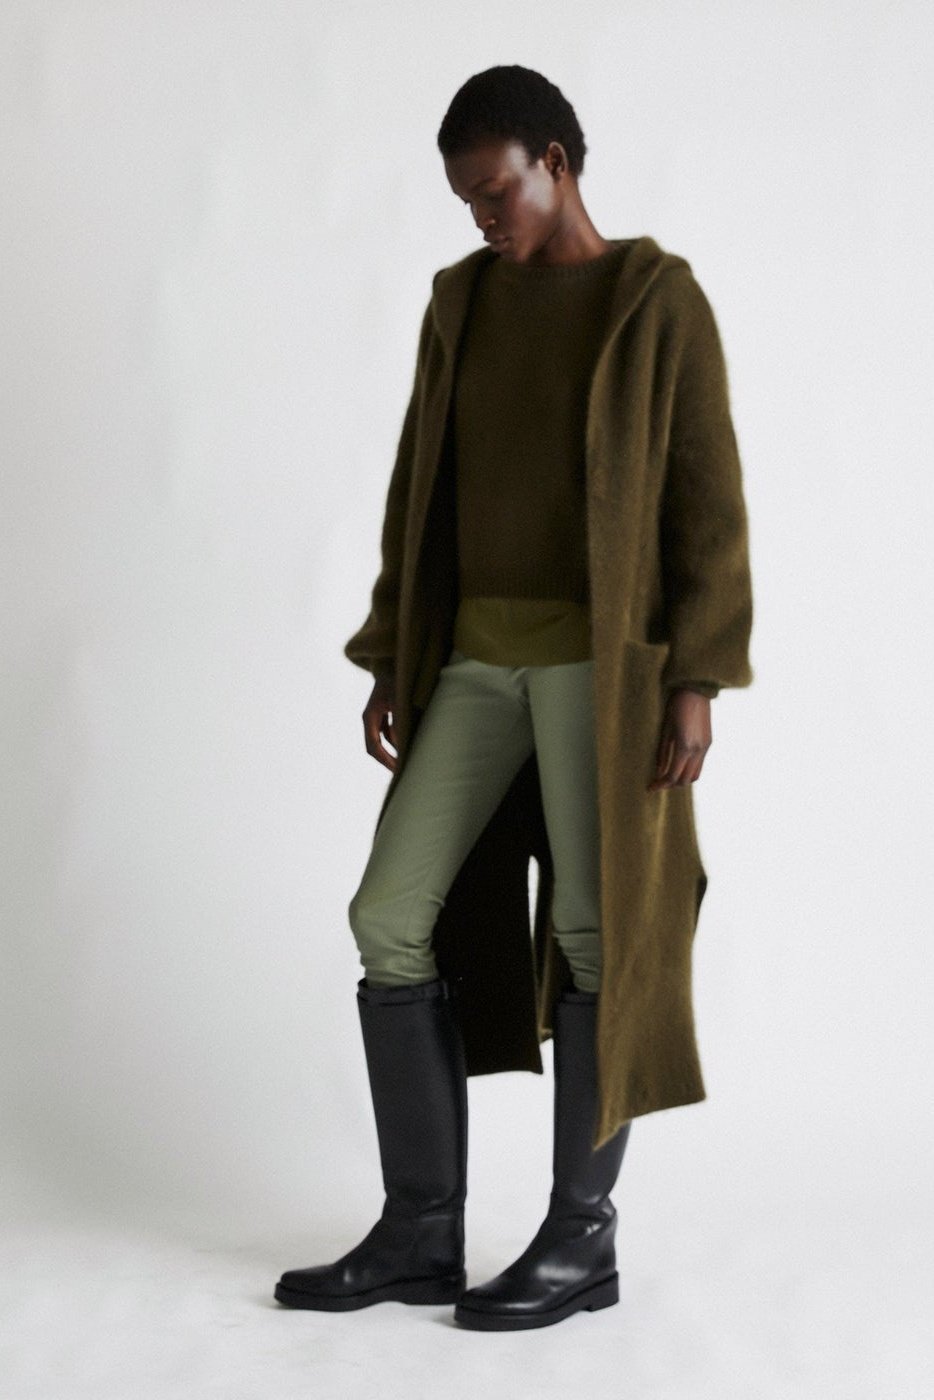 + Beryll Cashmere Coat with Hood | Kelp Green - +Beryll Cashmere Coat with Hood | Kelp Green - +Beryll Worn By Good People